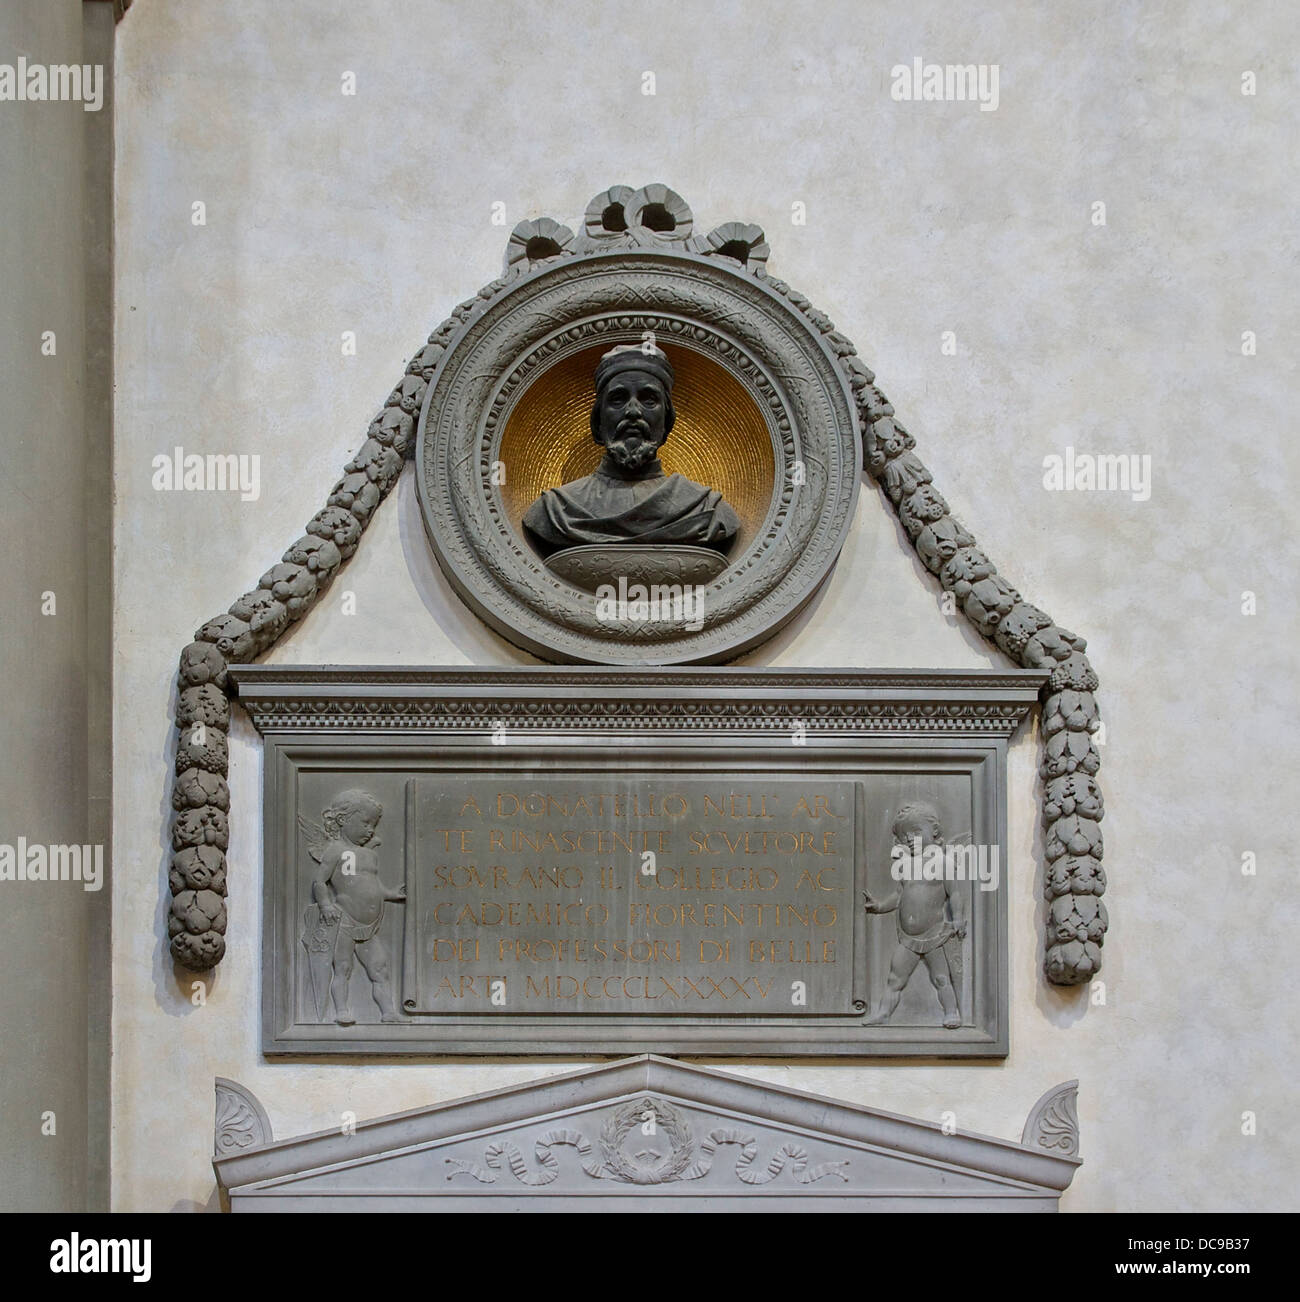 Monument in memory of Donatello, Basilica of Santa Croce in Florence, Italy. 1895. Stock Photo